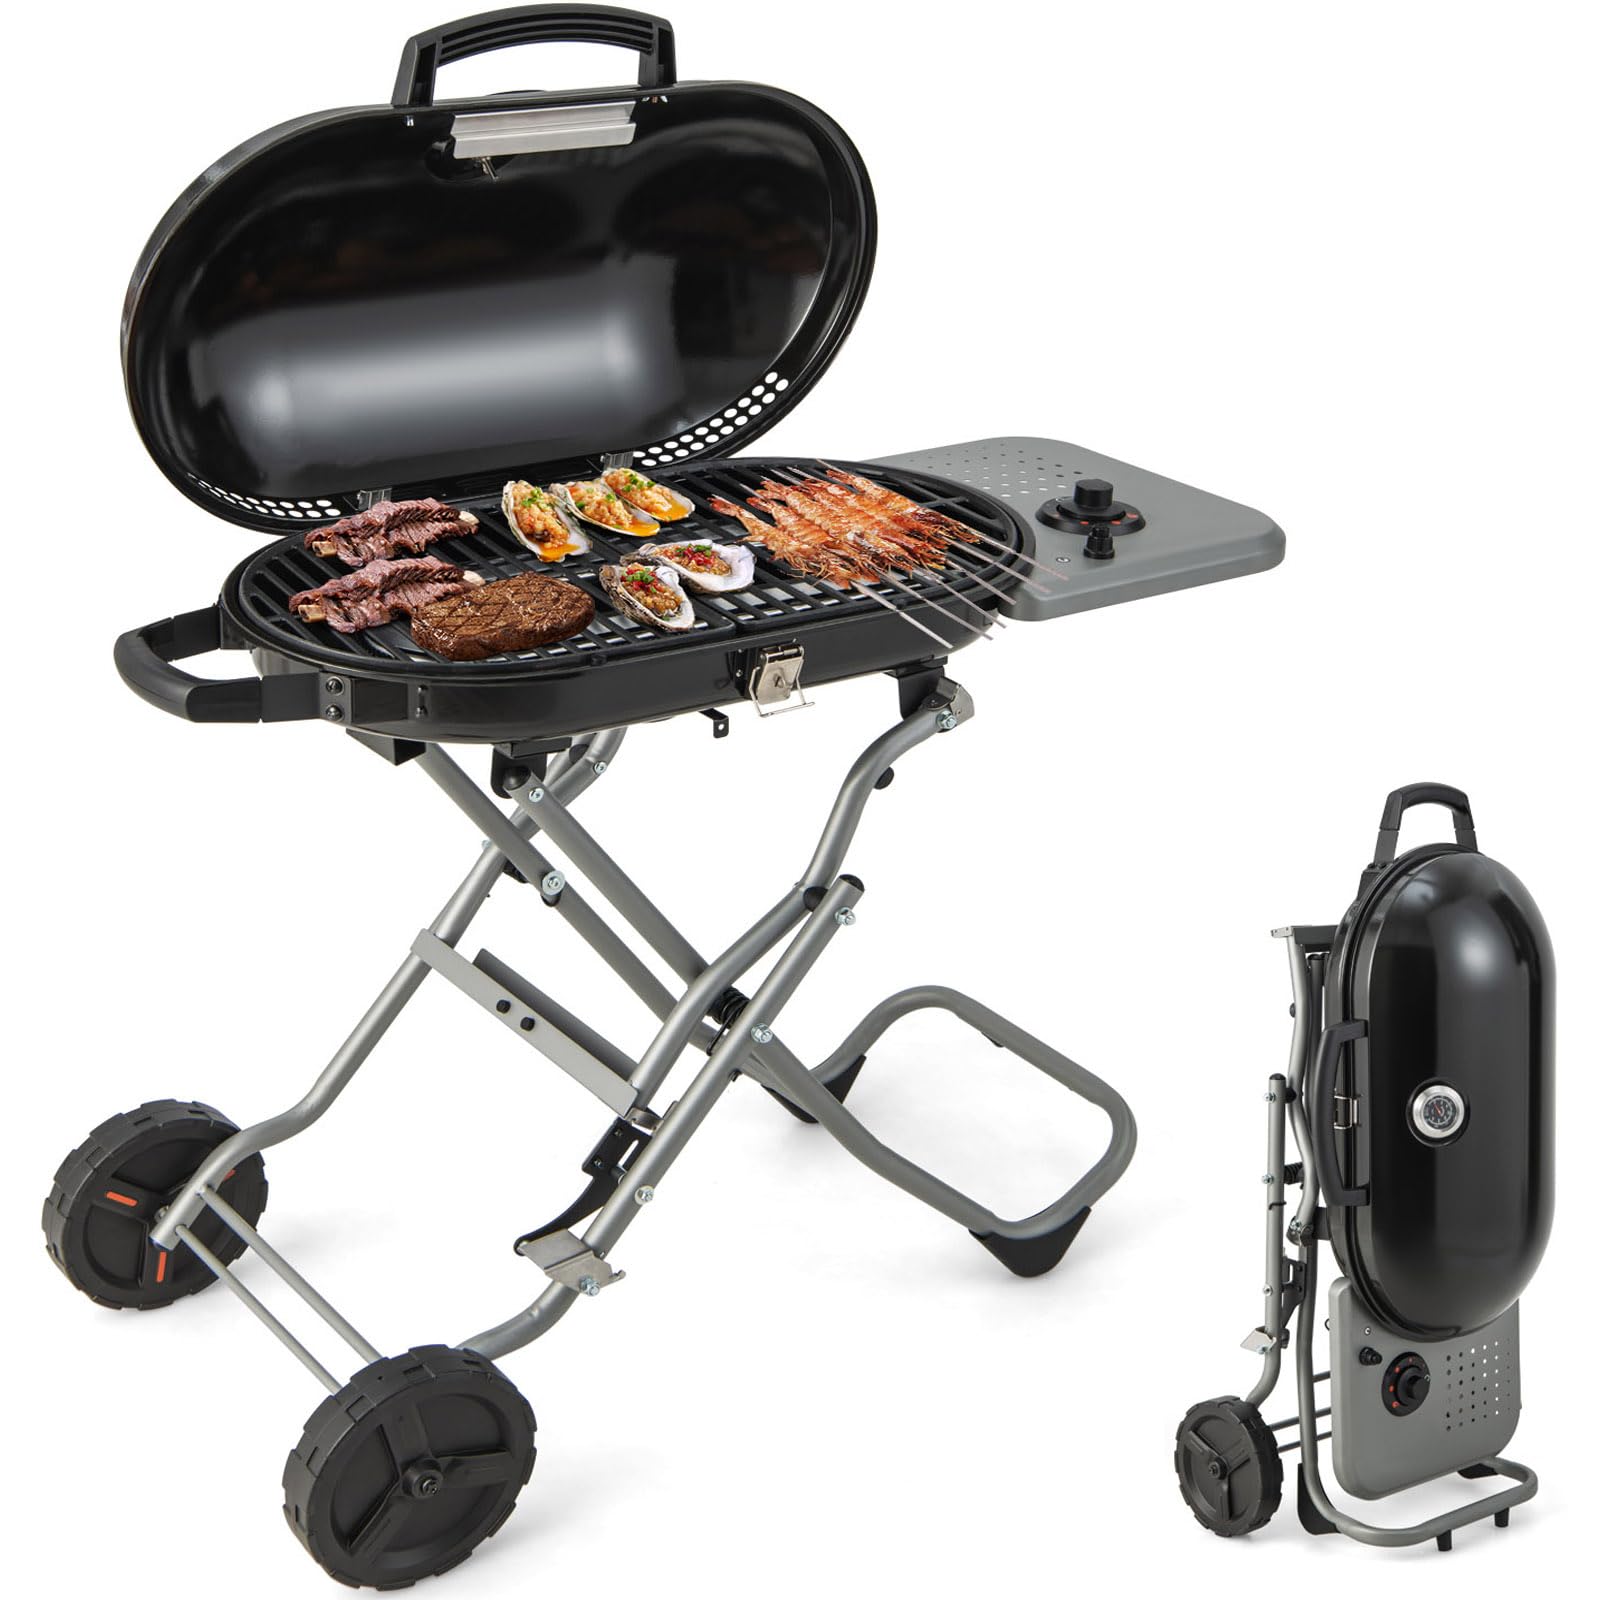 Giantex Gas Grill, Portable Propane Grill with 15,000 BTUs Burner, Side Table, 2 Wheels, Grease Tray